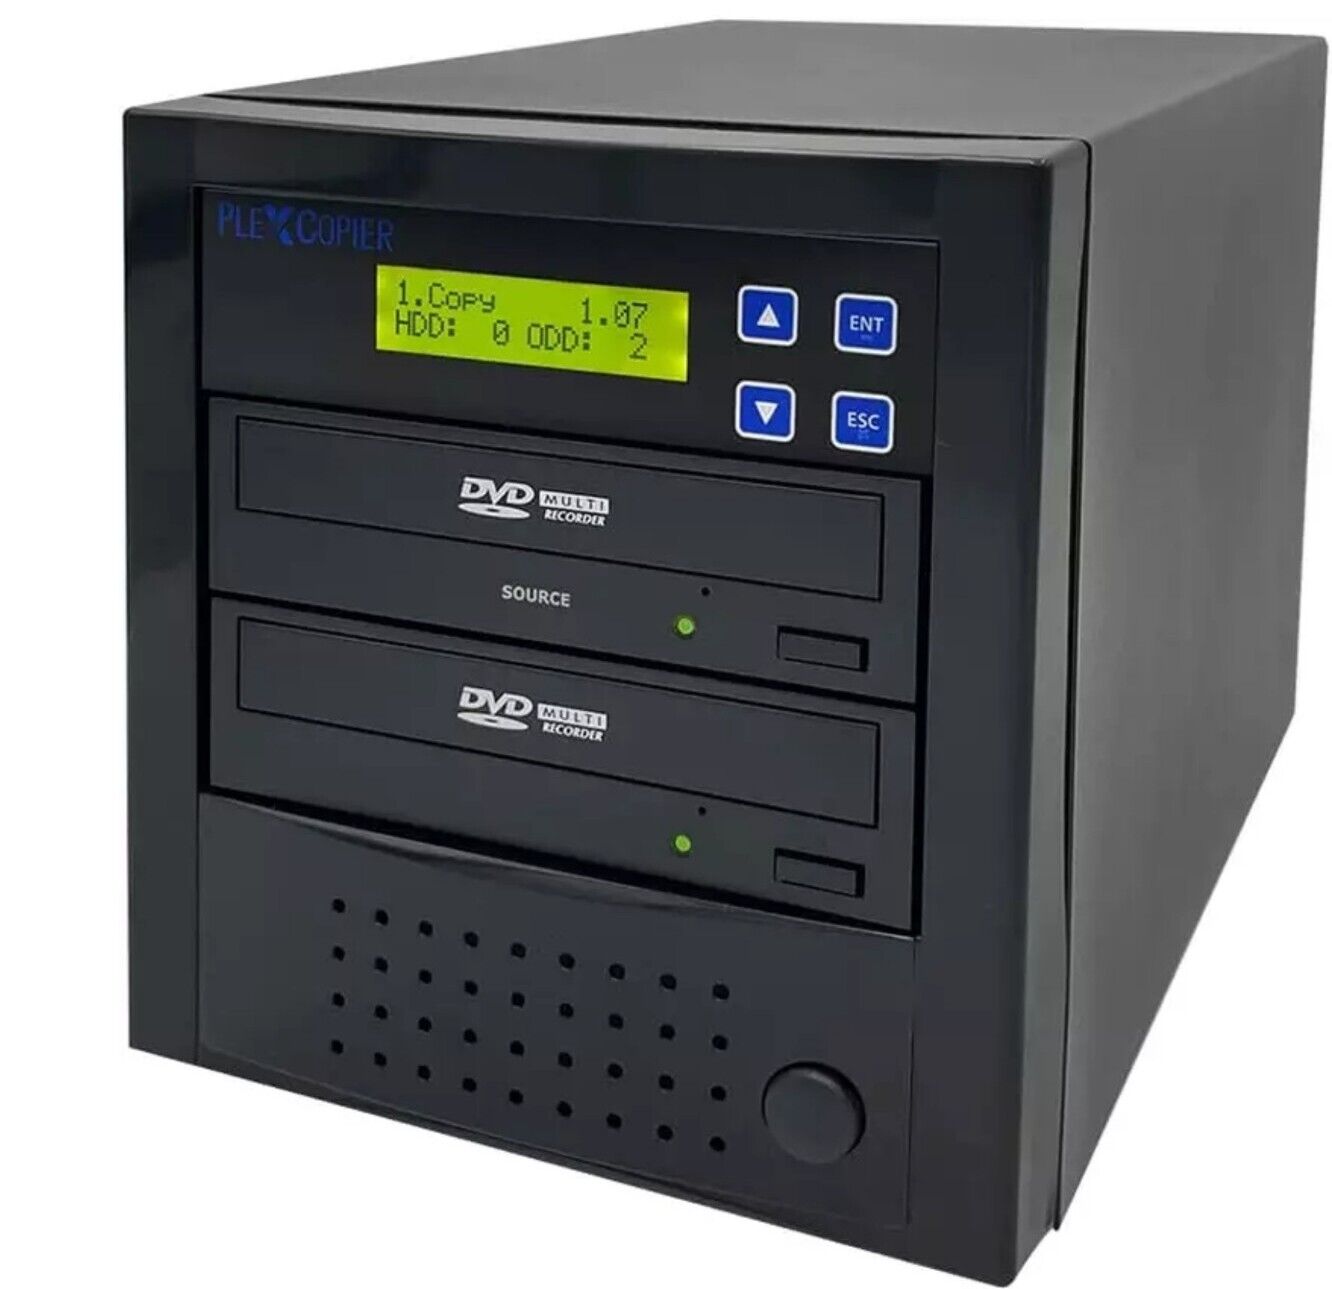 24X 1 to 1 CD DVD M-Disc Supported Duplicator Copier Tower with Free Copy Protec